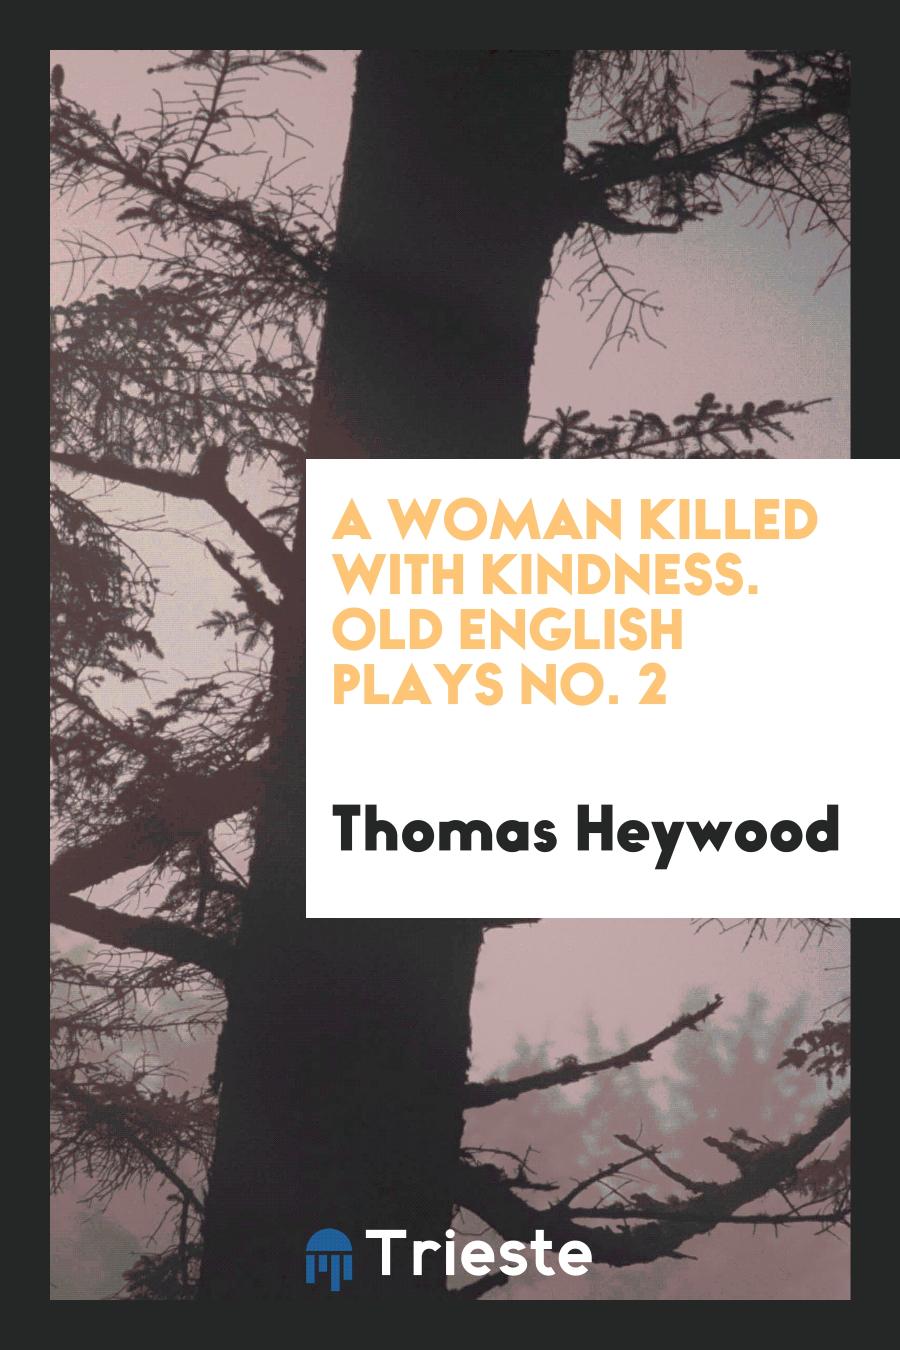 A Woman Killed with Kindness. Old English Plays No. 2